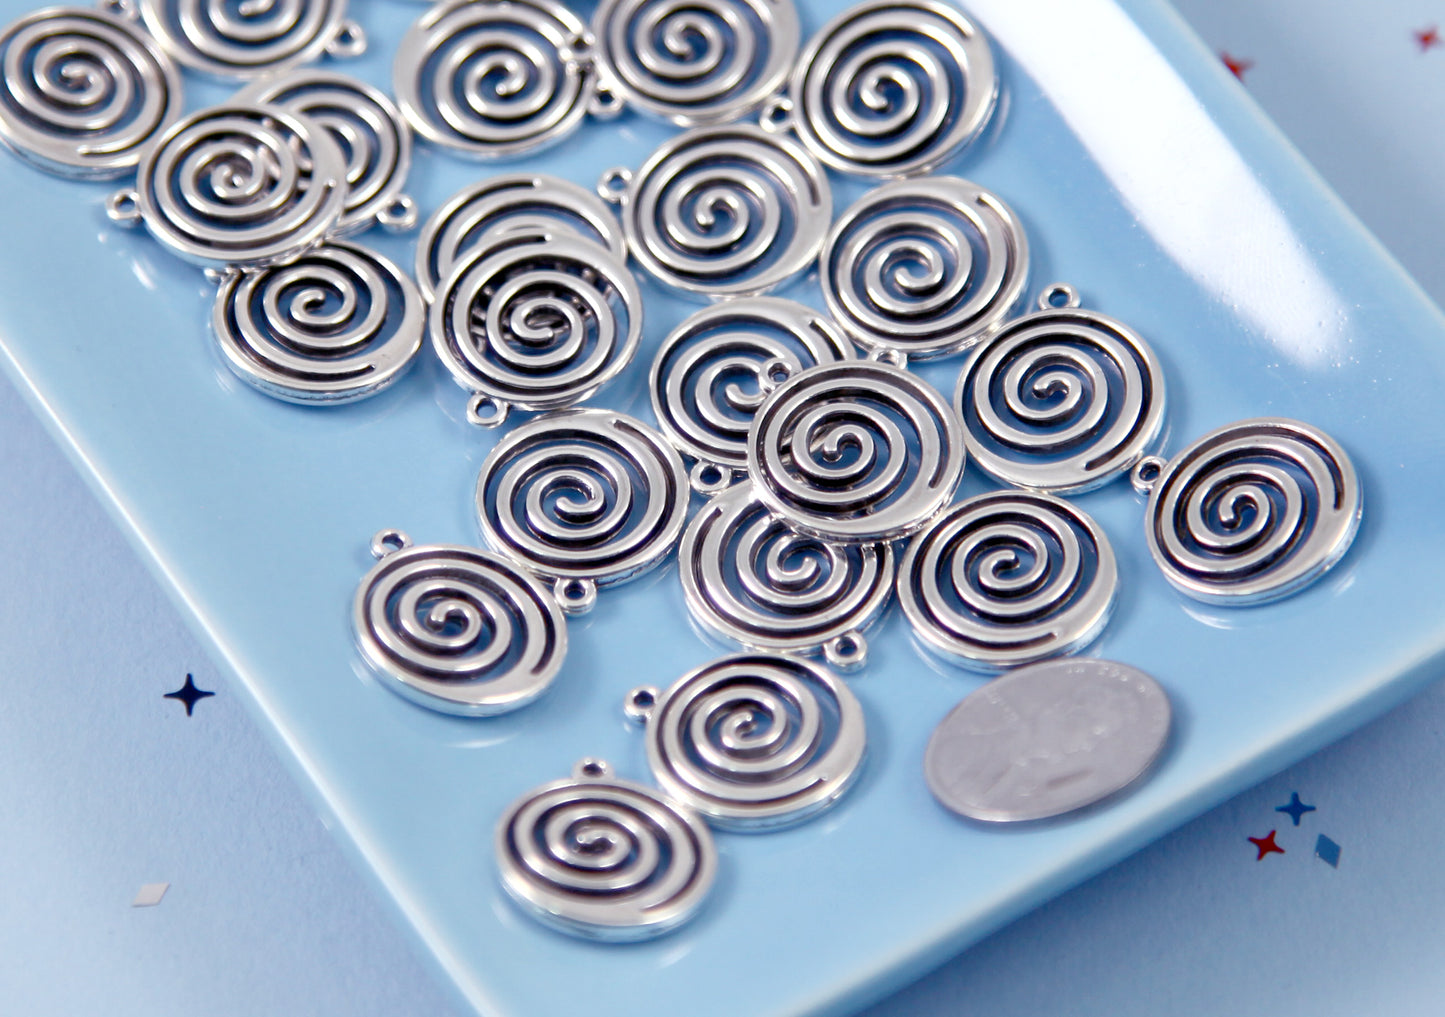 Spiral Charms - 20mm Swirl Pendants Silver Color Vortex Swirly Round Metal Charms - 12 pcs set